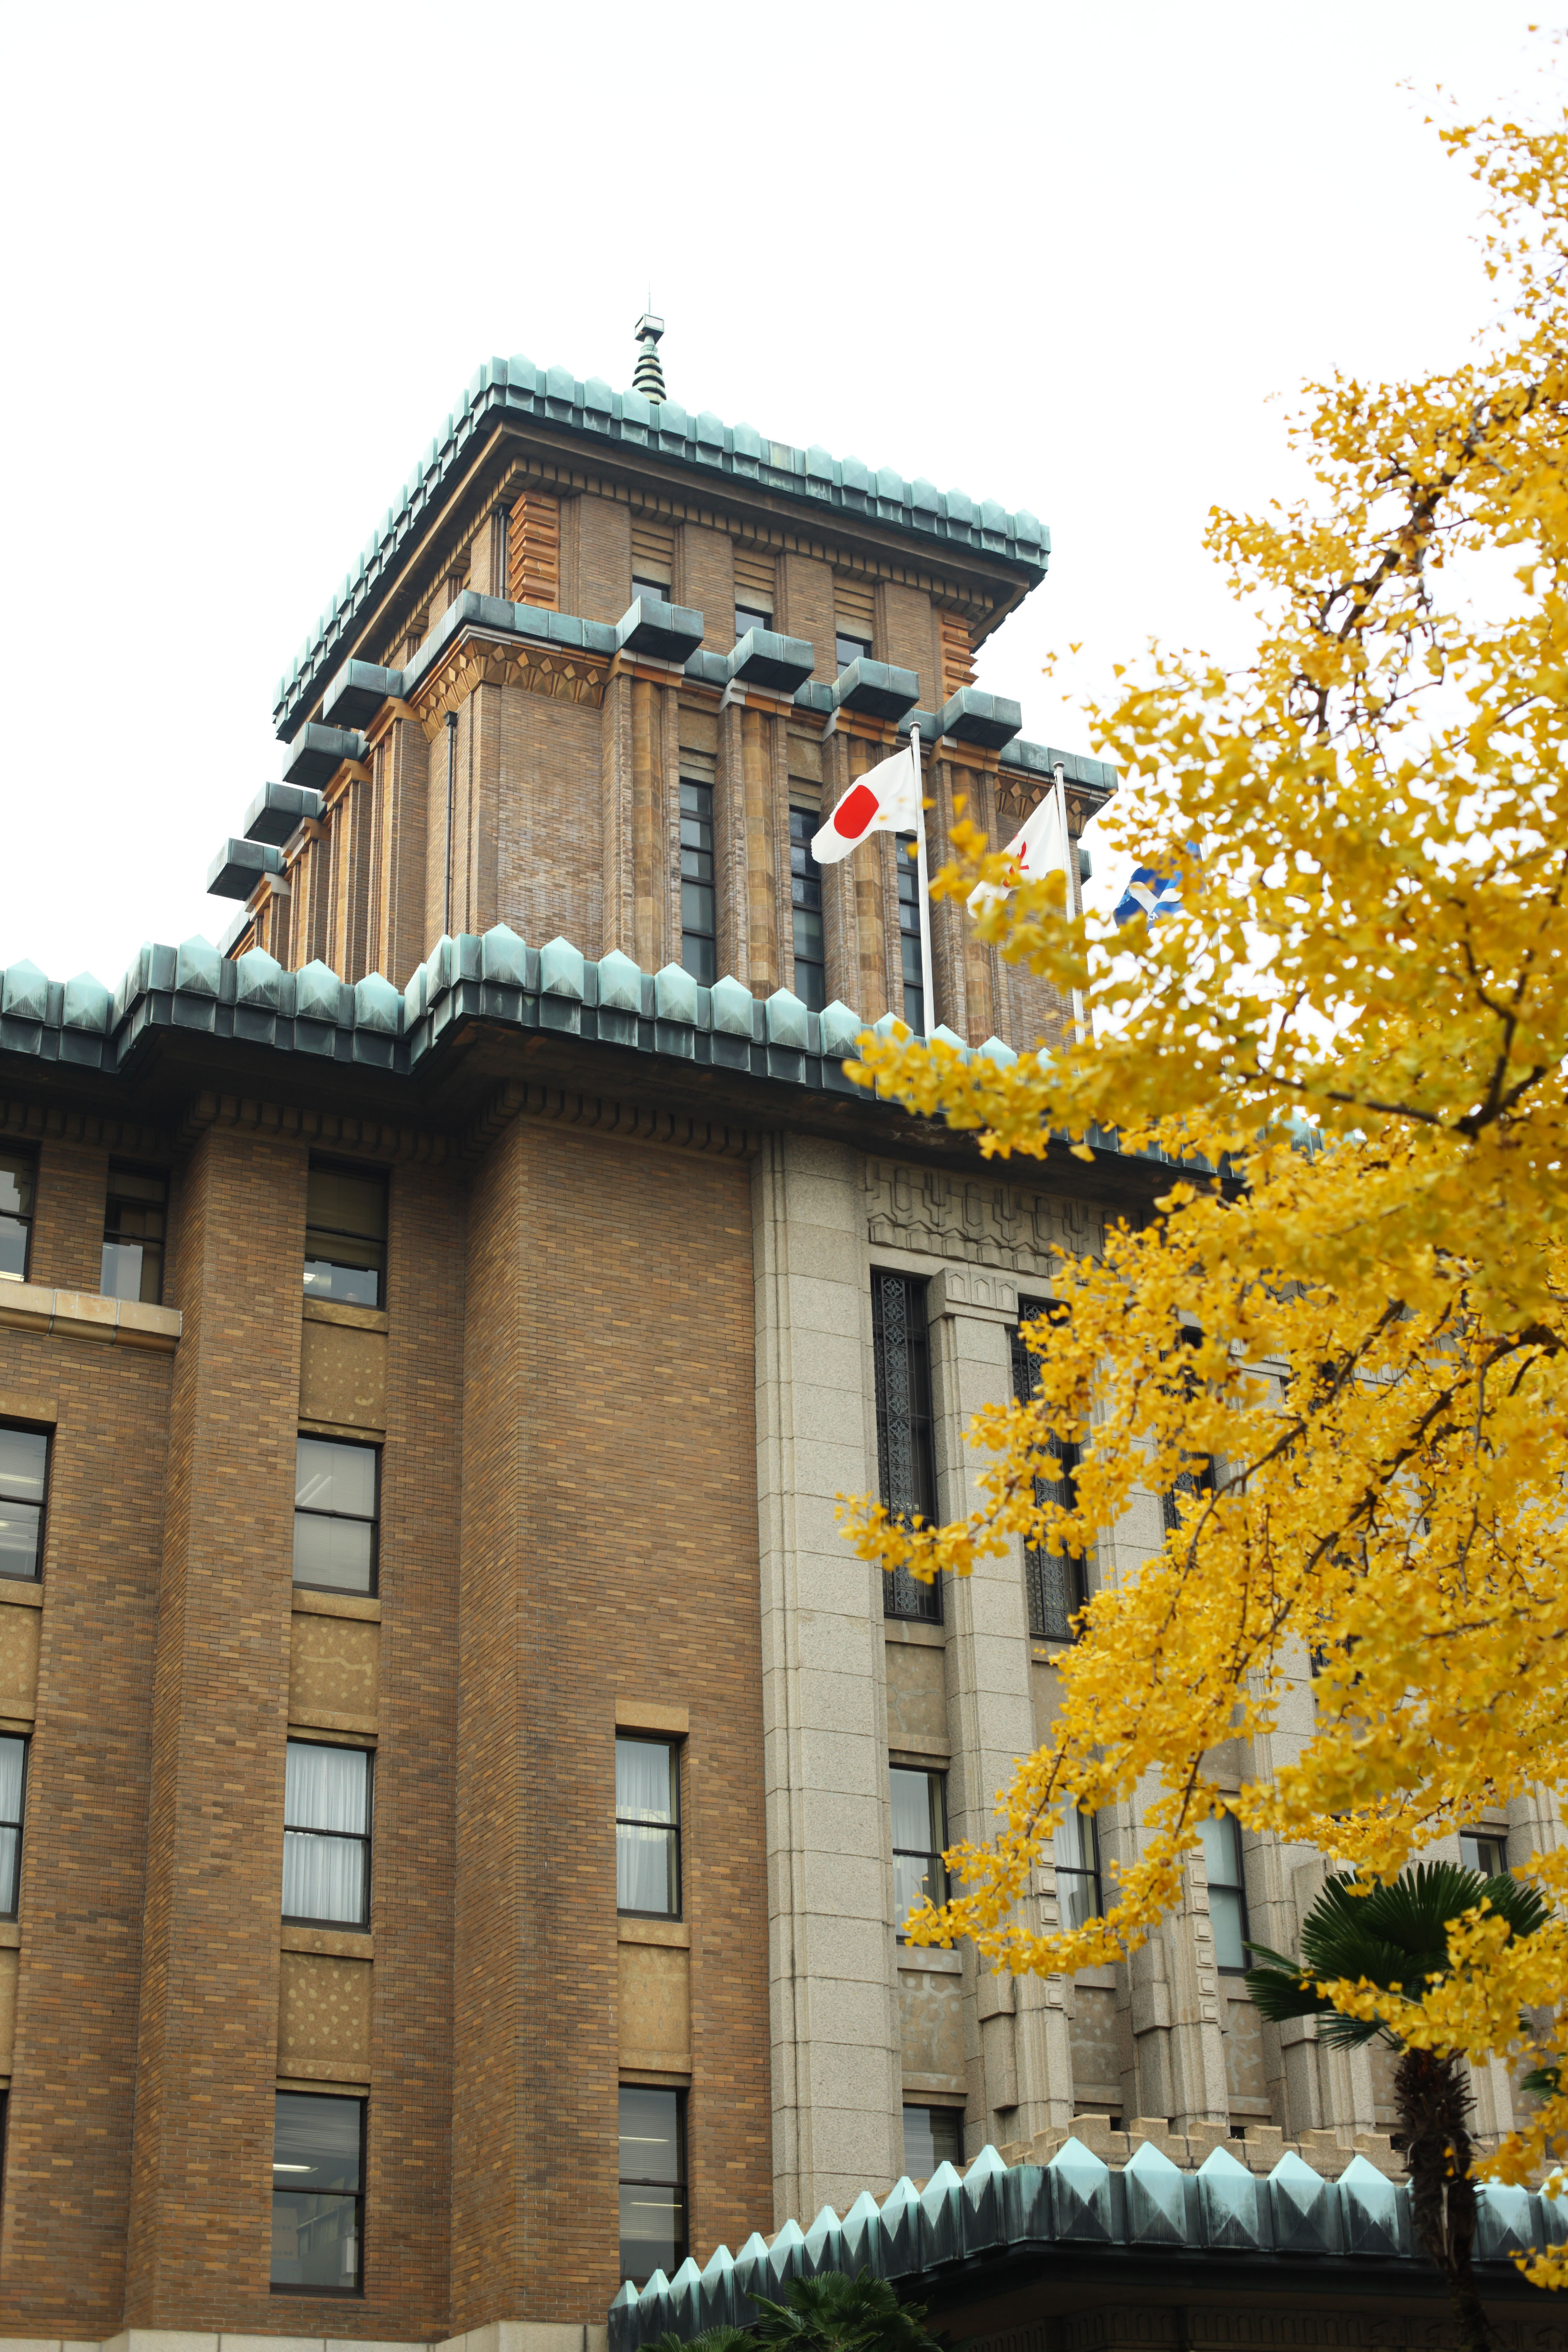 photo,material,free,landscape,picture,stock photo,Creative Commons,The Kanagawa prefectural office, ginkgo, Colored leaves, national flag, brick